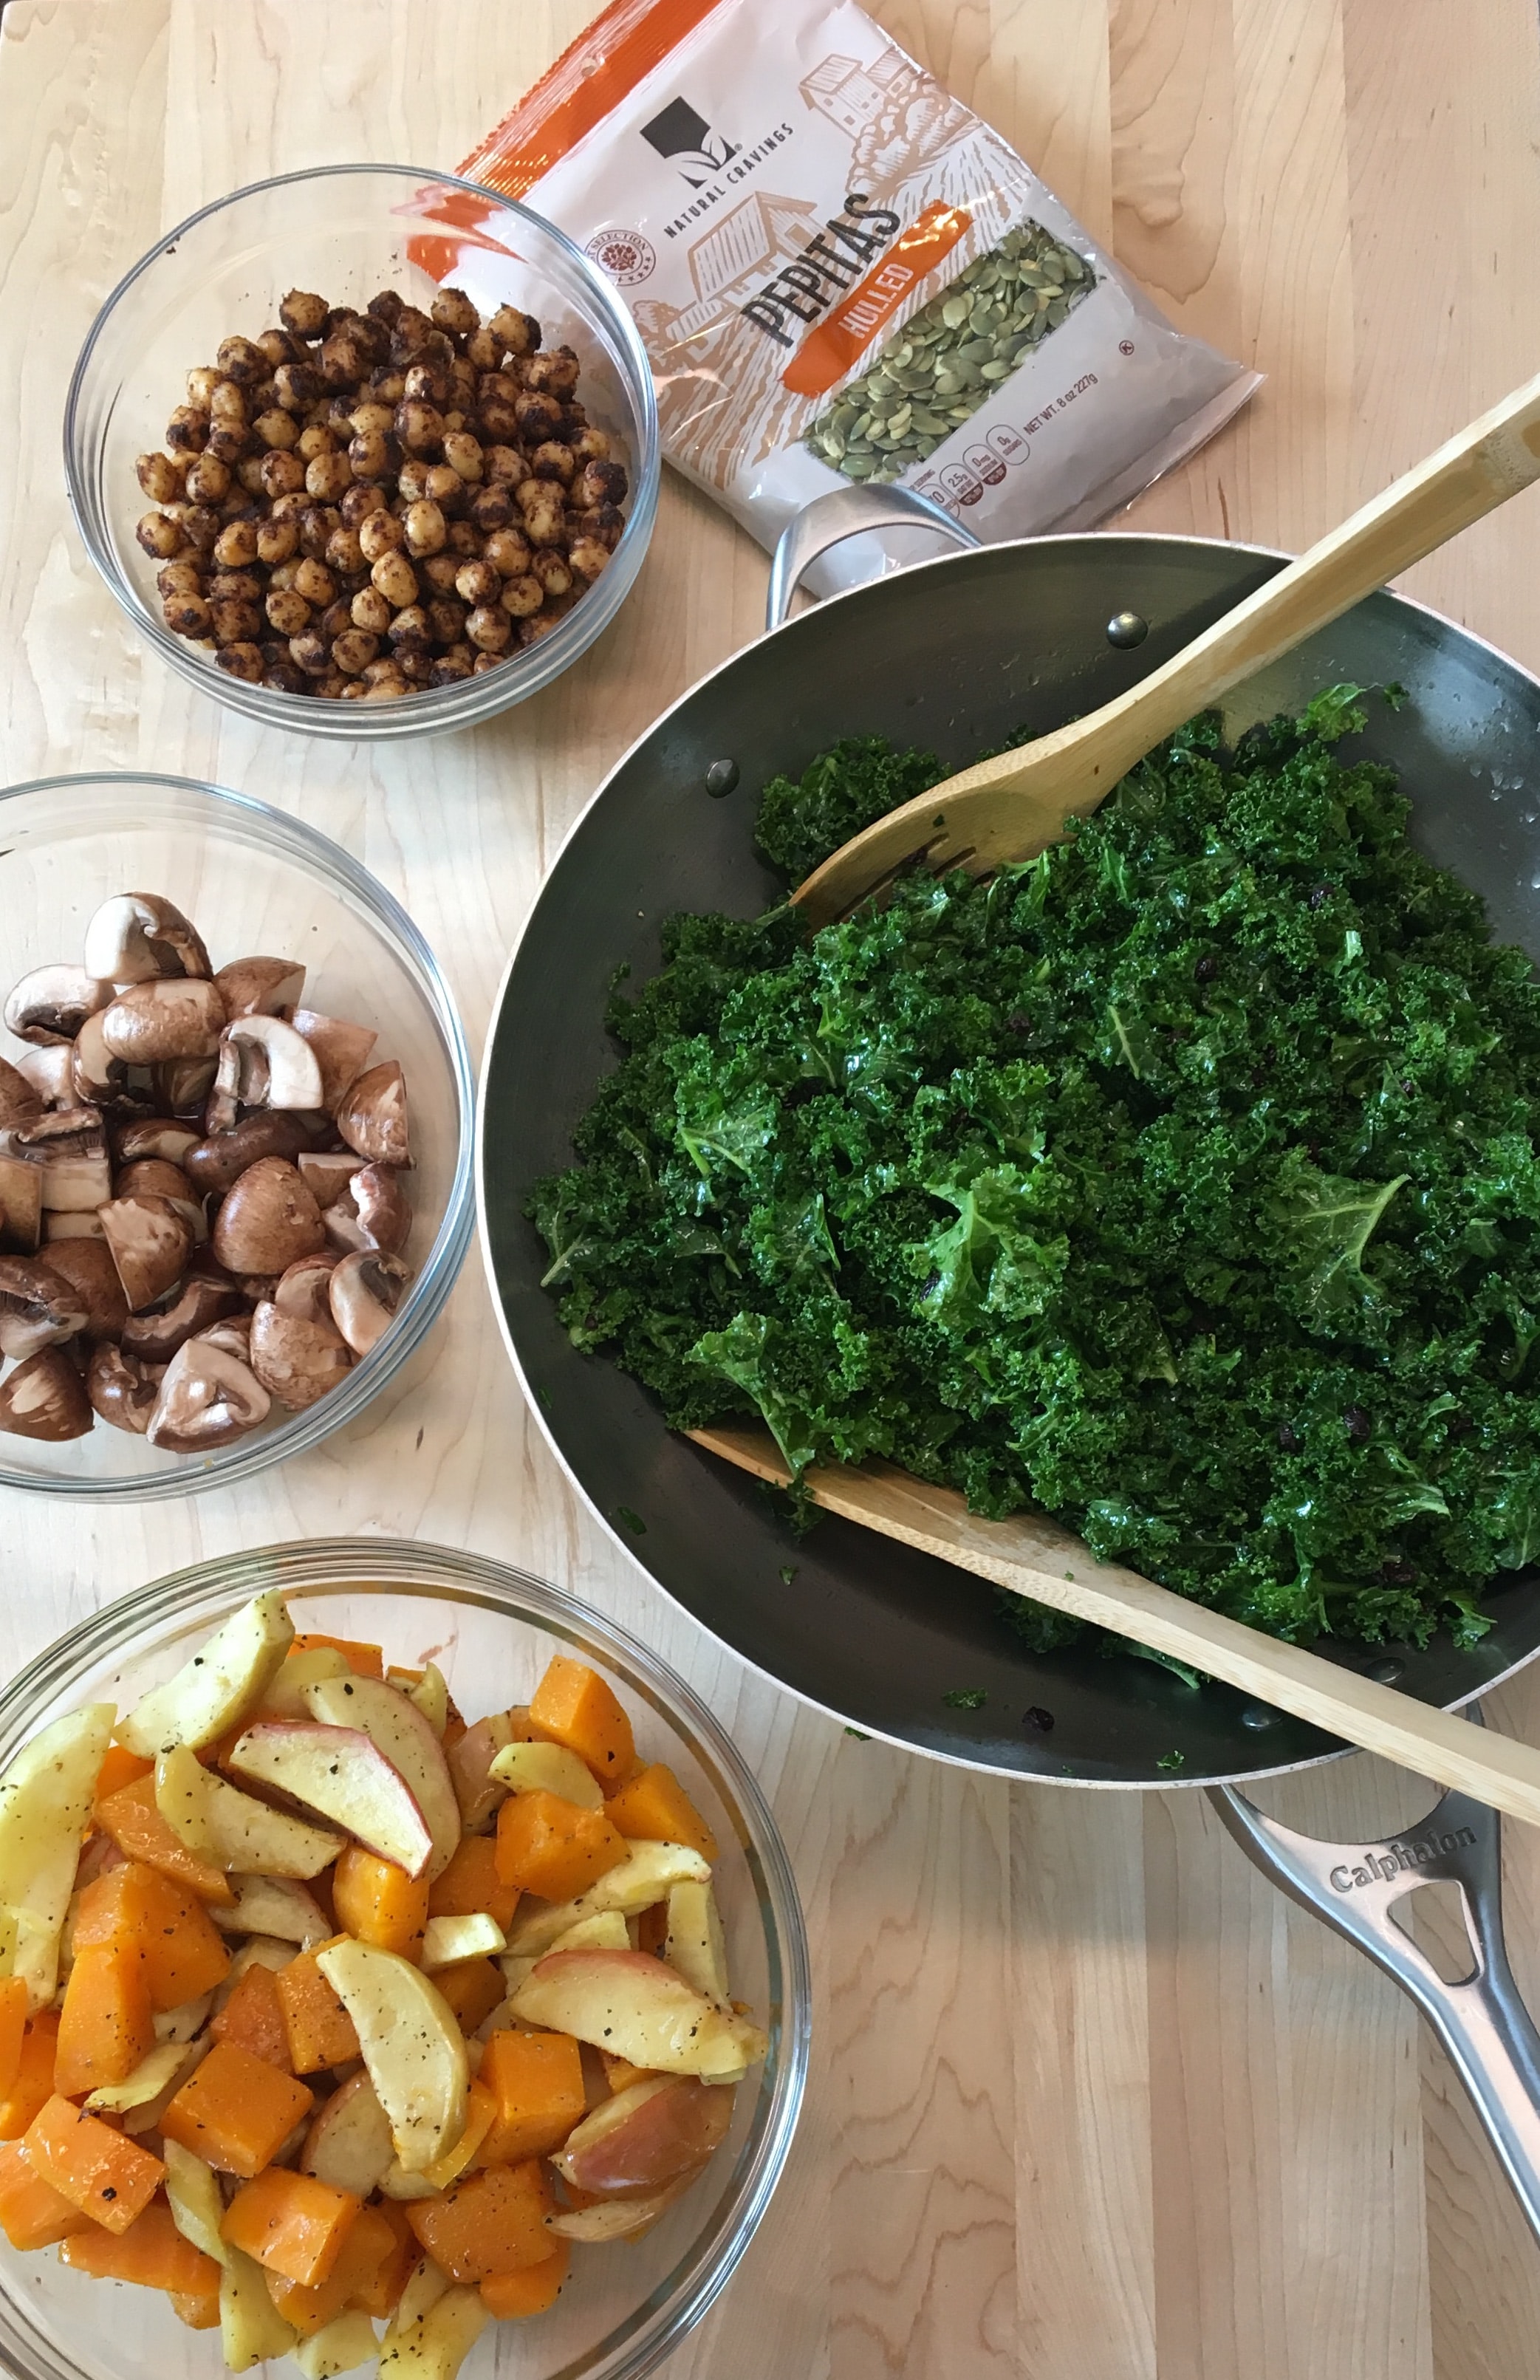 Photo of ingredients for a Kale Salad including  a bowl of kale, a bag of pepitas, a bowl of seasoned chickpeas, a bowl of raw mushrooms, and a bowl of mixed cooked apples and butternut squash.